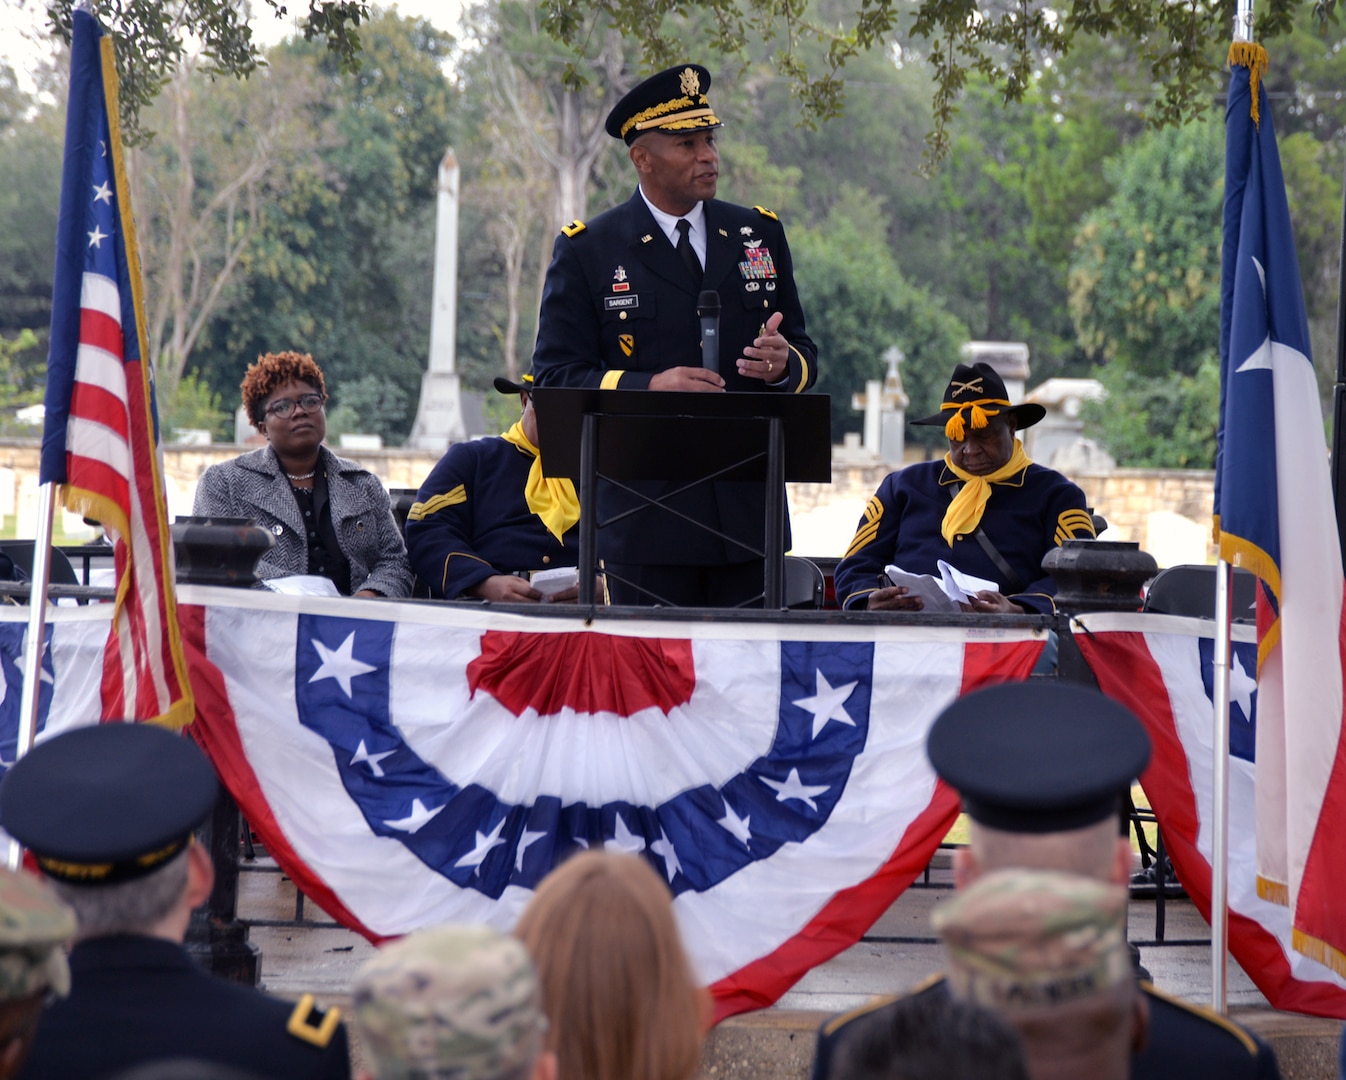 Maj. Gen. Patrick Sargent, commanding general, U.S. Army Medical Department Center & School, Joint Base San Antonio-Fort Sam Houston, delivers the keynote speech at the annual Bexar County Buffalo Soldiers Commemorative Ceremony at the San Antonio National Cemetery Nov. 11. Comprised of former slaves, freed men and Black Civil War veterans, the historic Buffalo Soldiers persevered through the most difficult conditions imaginable to become some of the most elite and most decorated units in the U.S. Army.